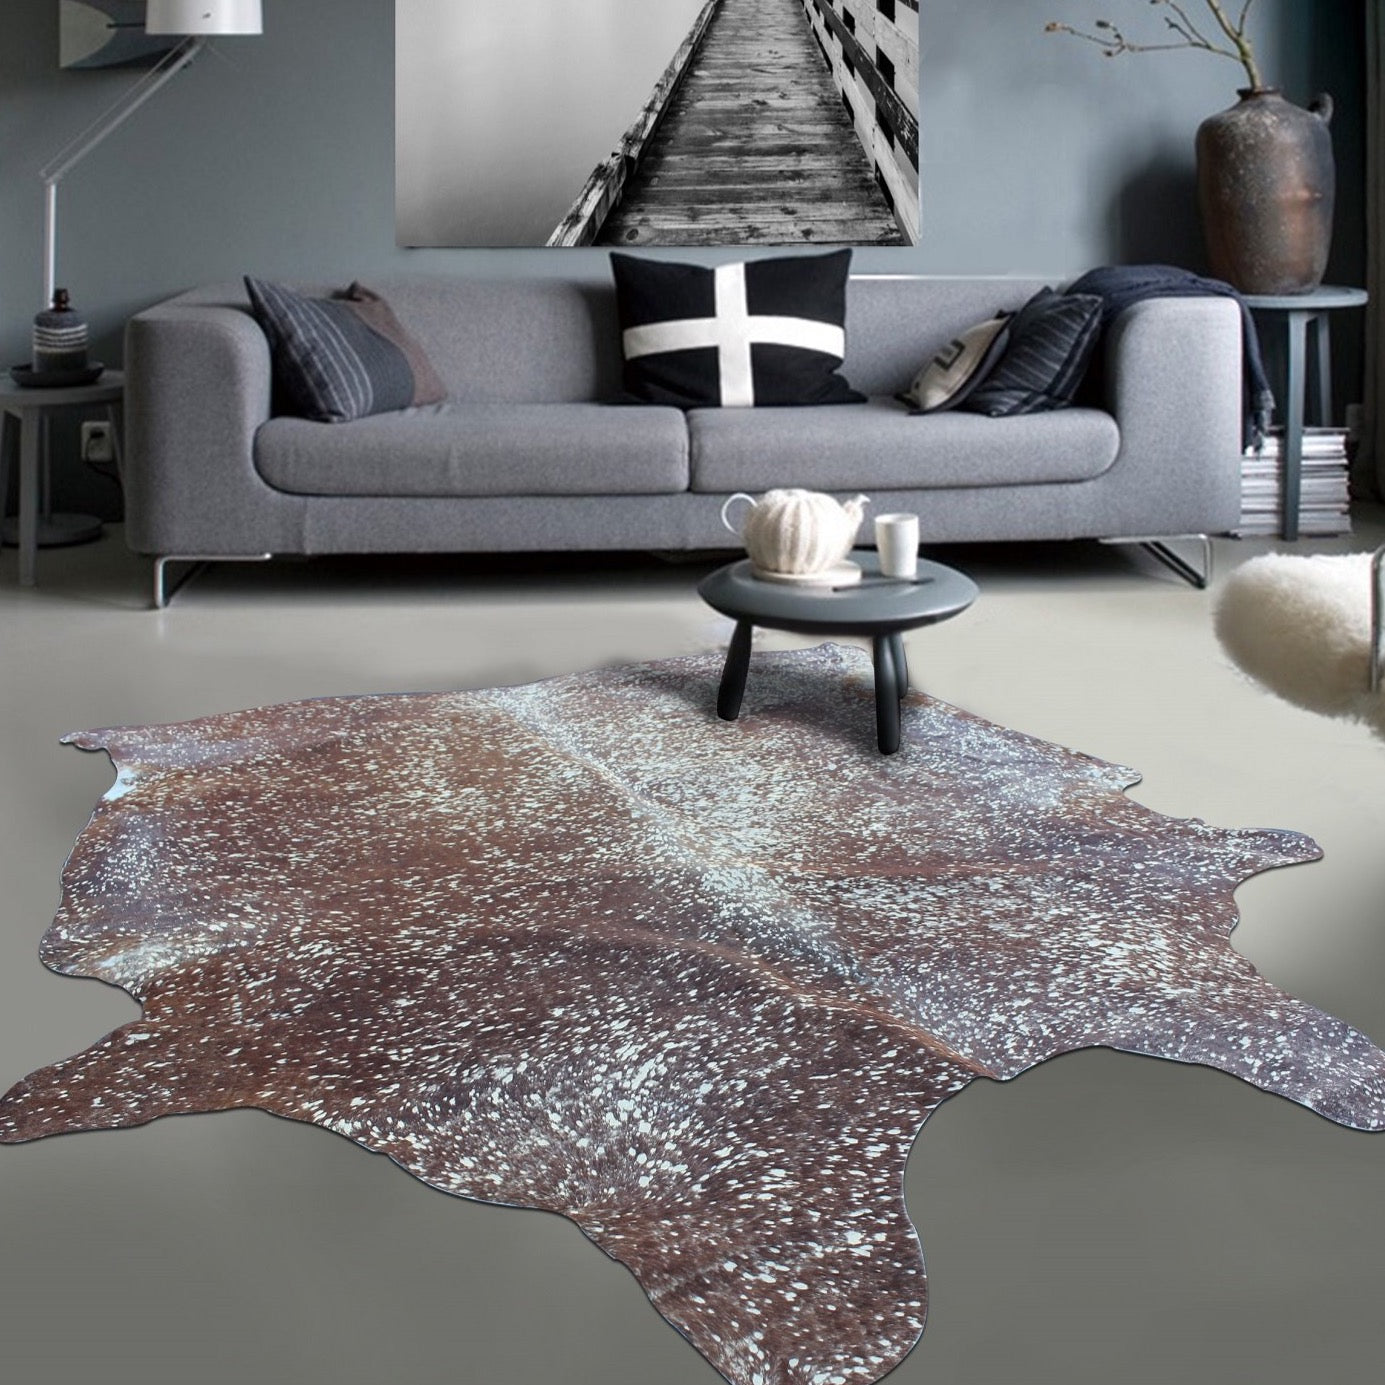 Real Leather Metallic Cowhide